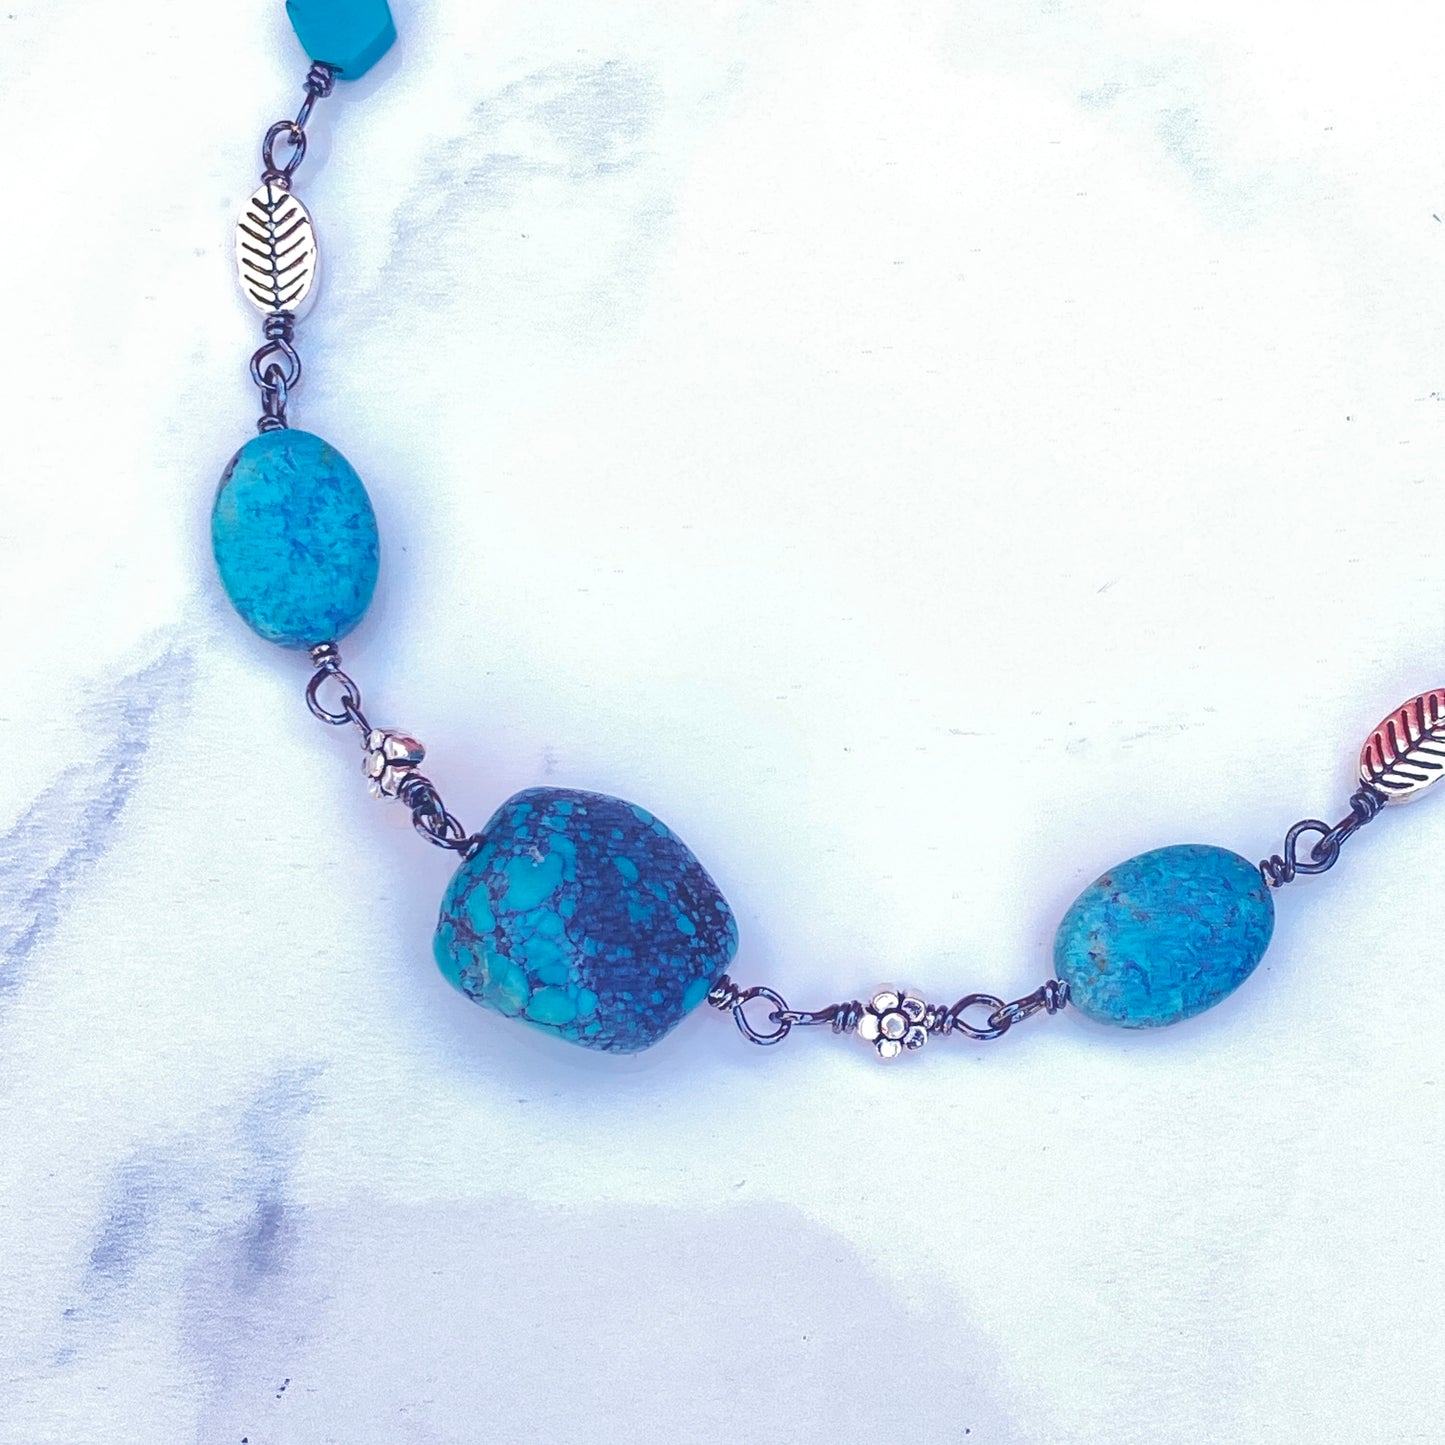 Turquoise gemstones and sterling silver Flower Necklace